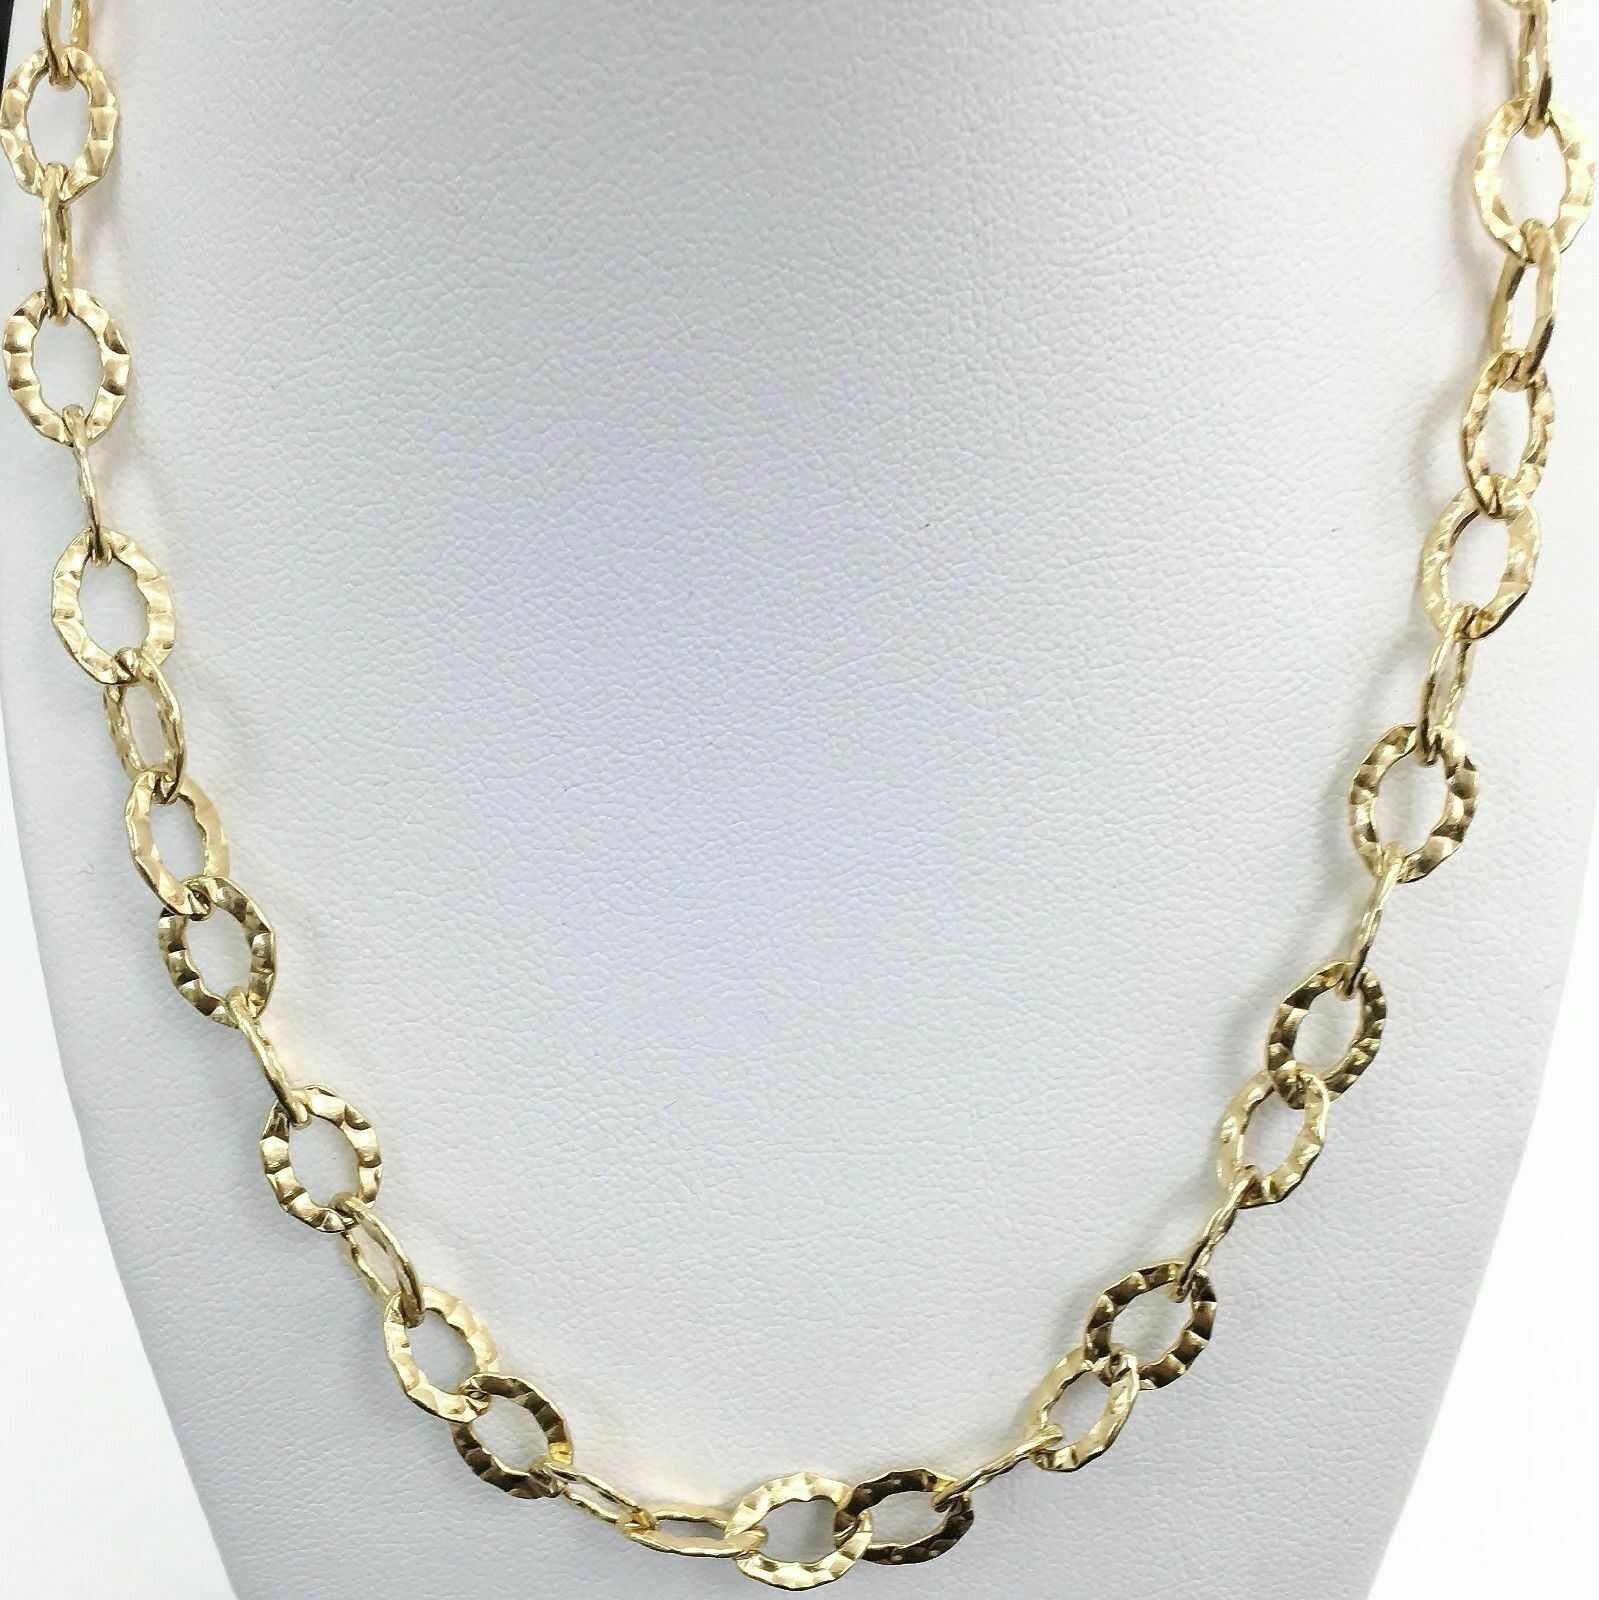 Solid 10 Karat Yellow Gold Hammered and Satin Finish Necklace 23 Inch Brand New